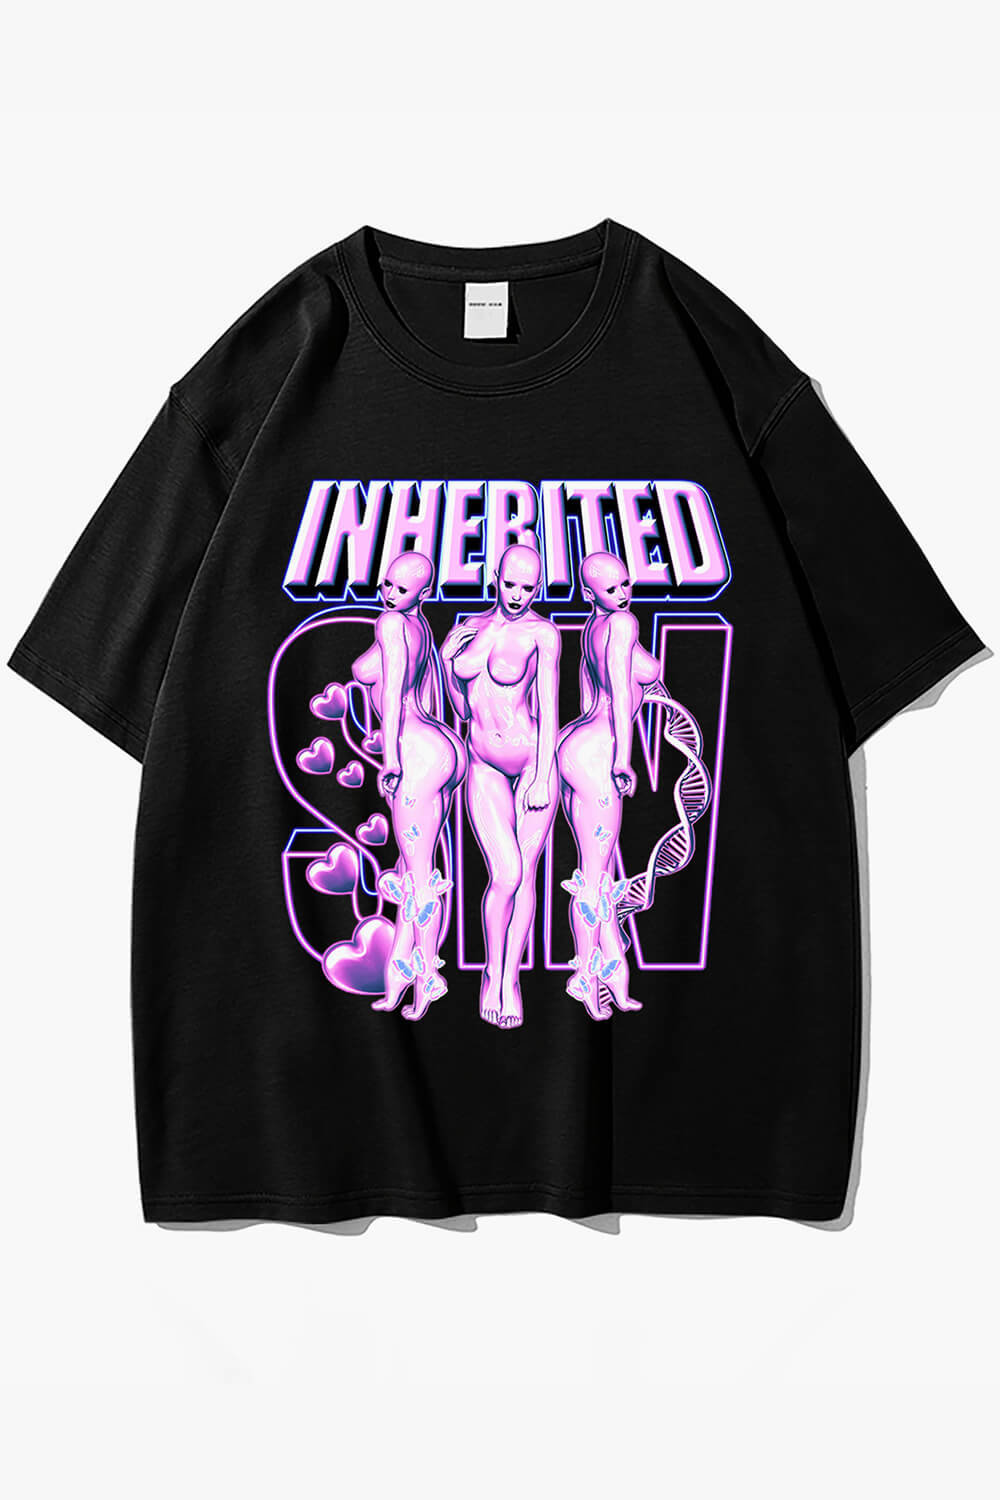 Cyber Y2K T-Shirt Inherited - Aesthetic Clothes Shop